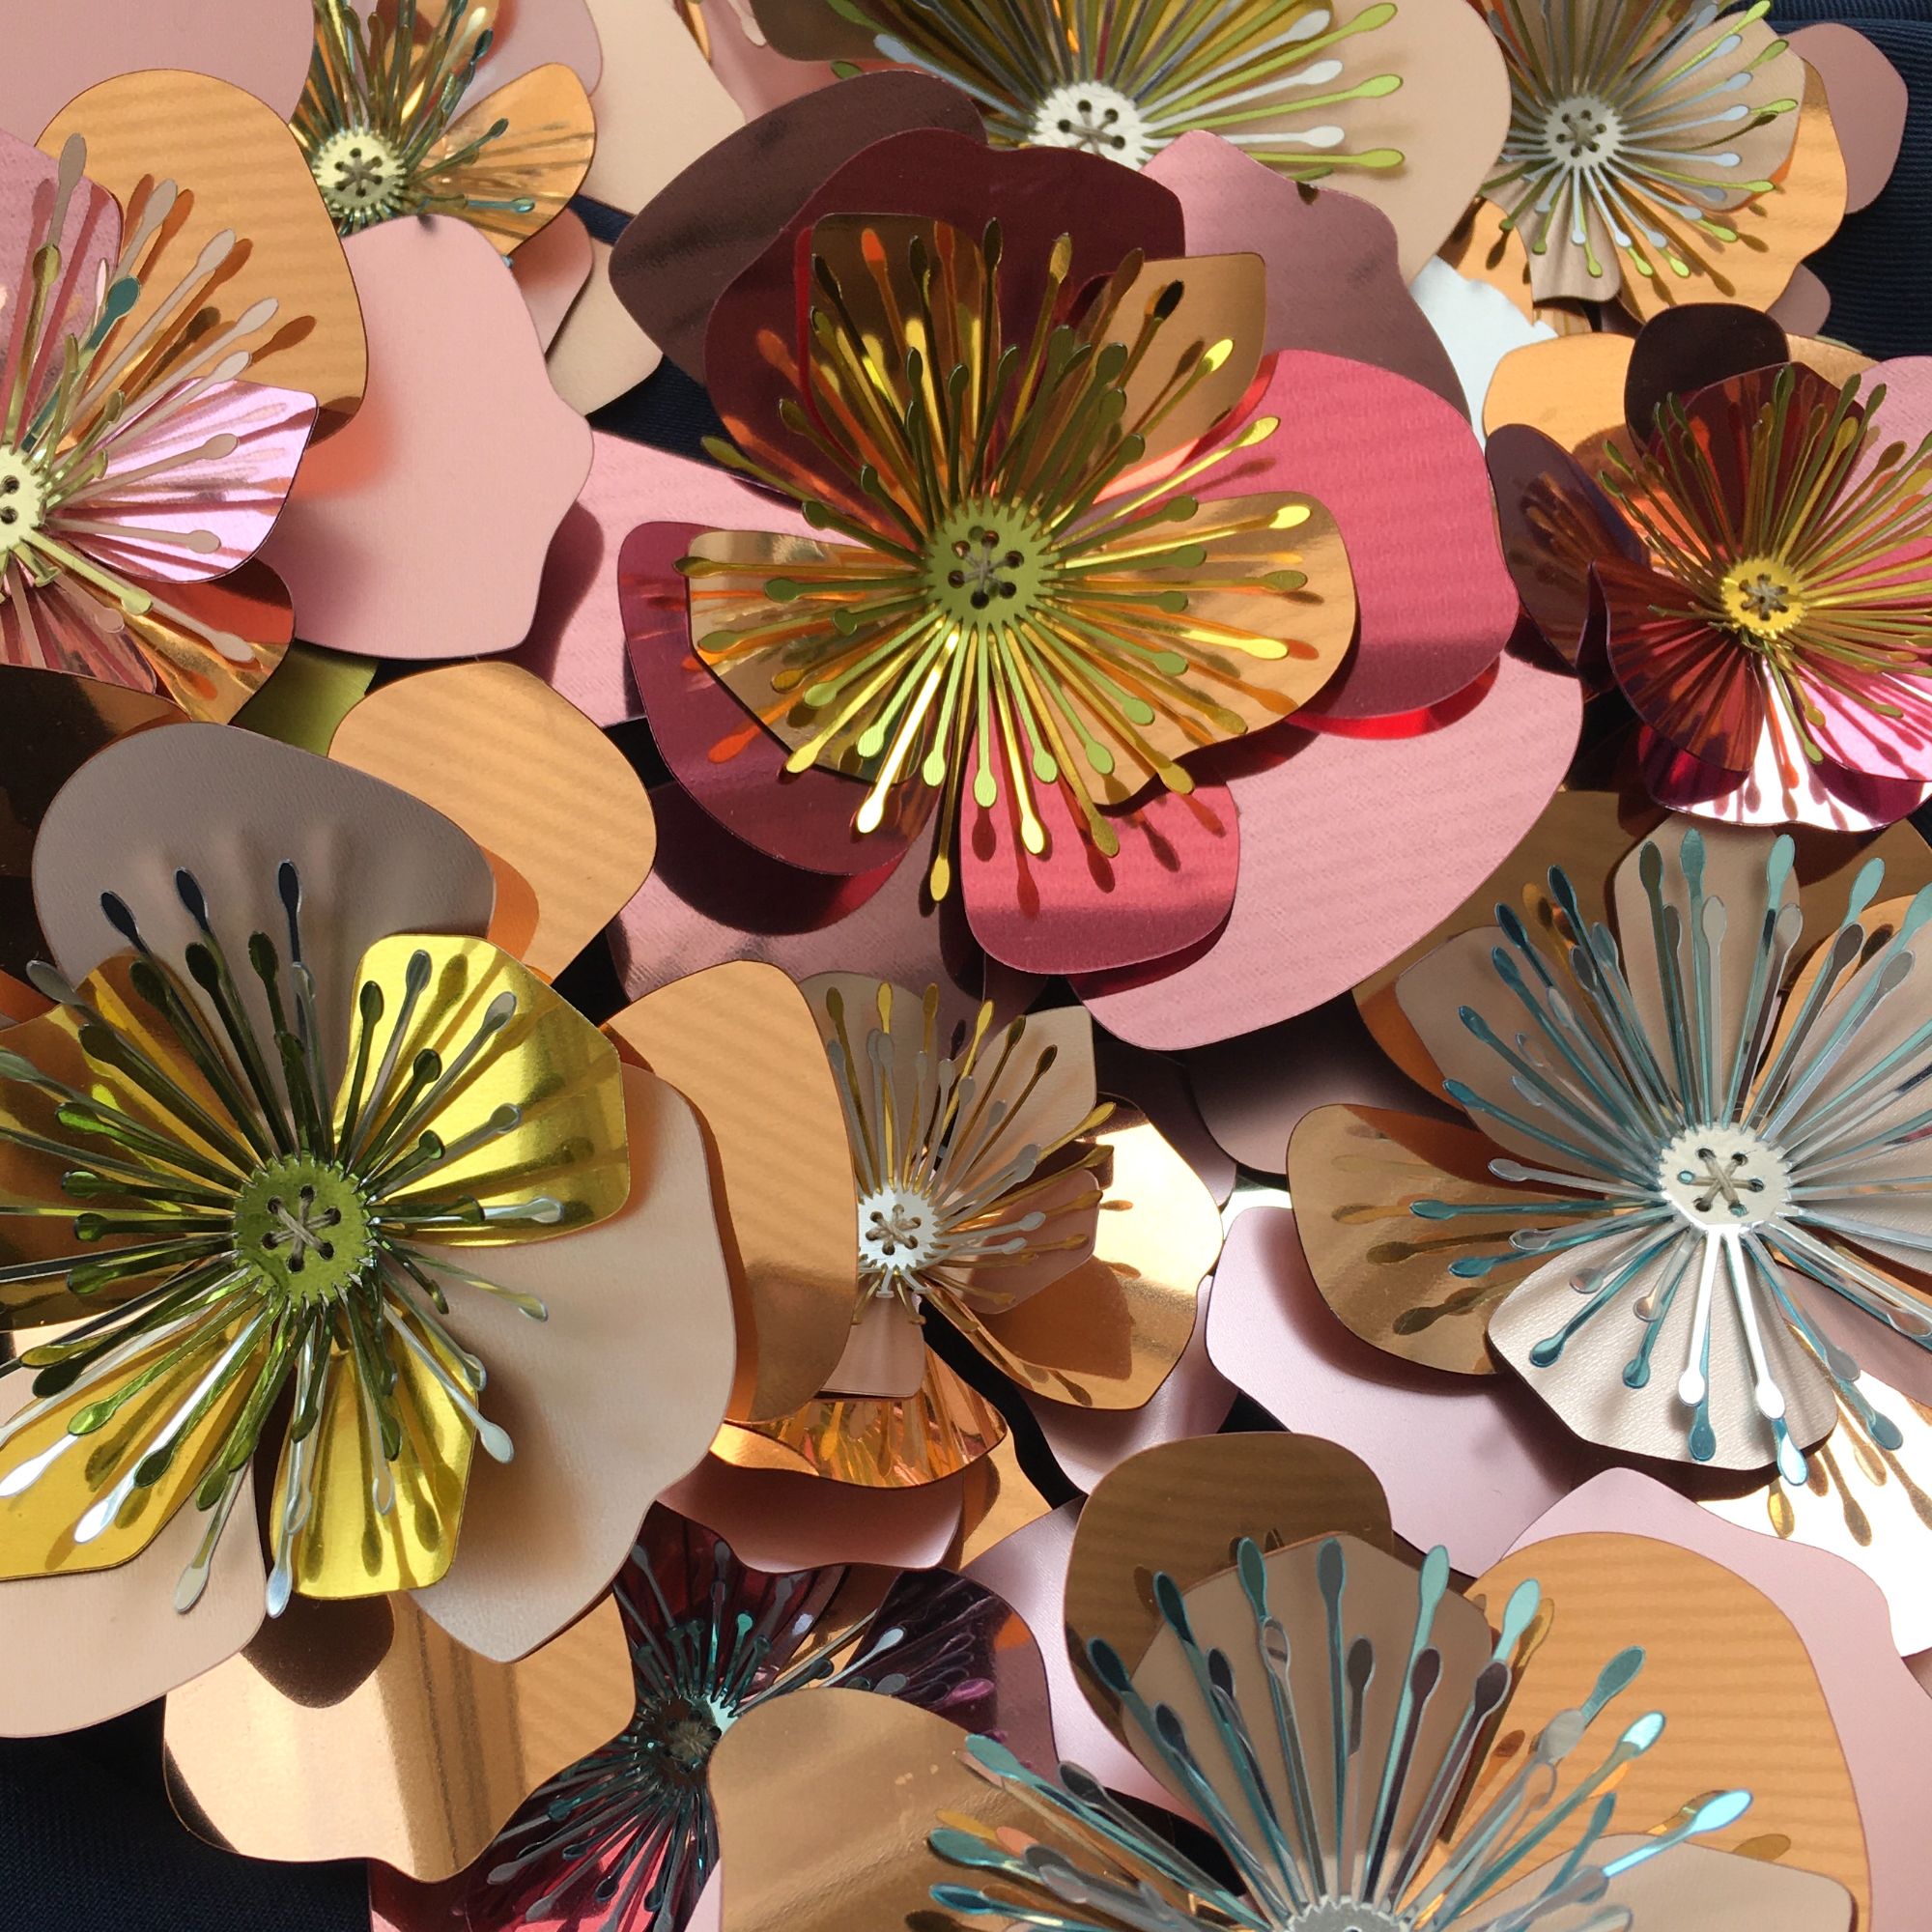 Bespoke sequin design of 3D flowers with layers of petals in pinks and golds